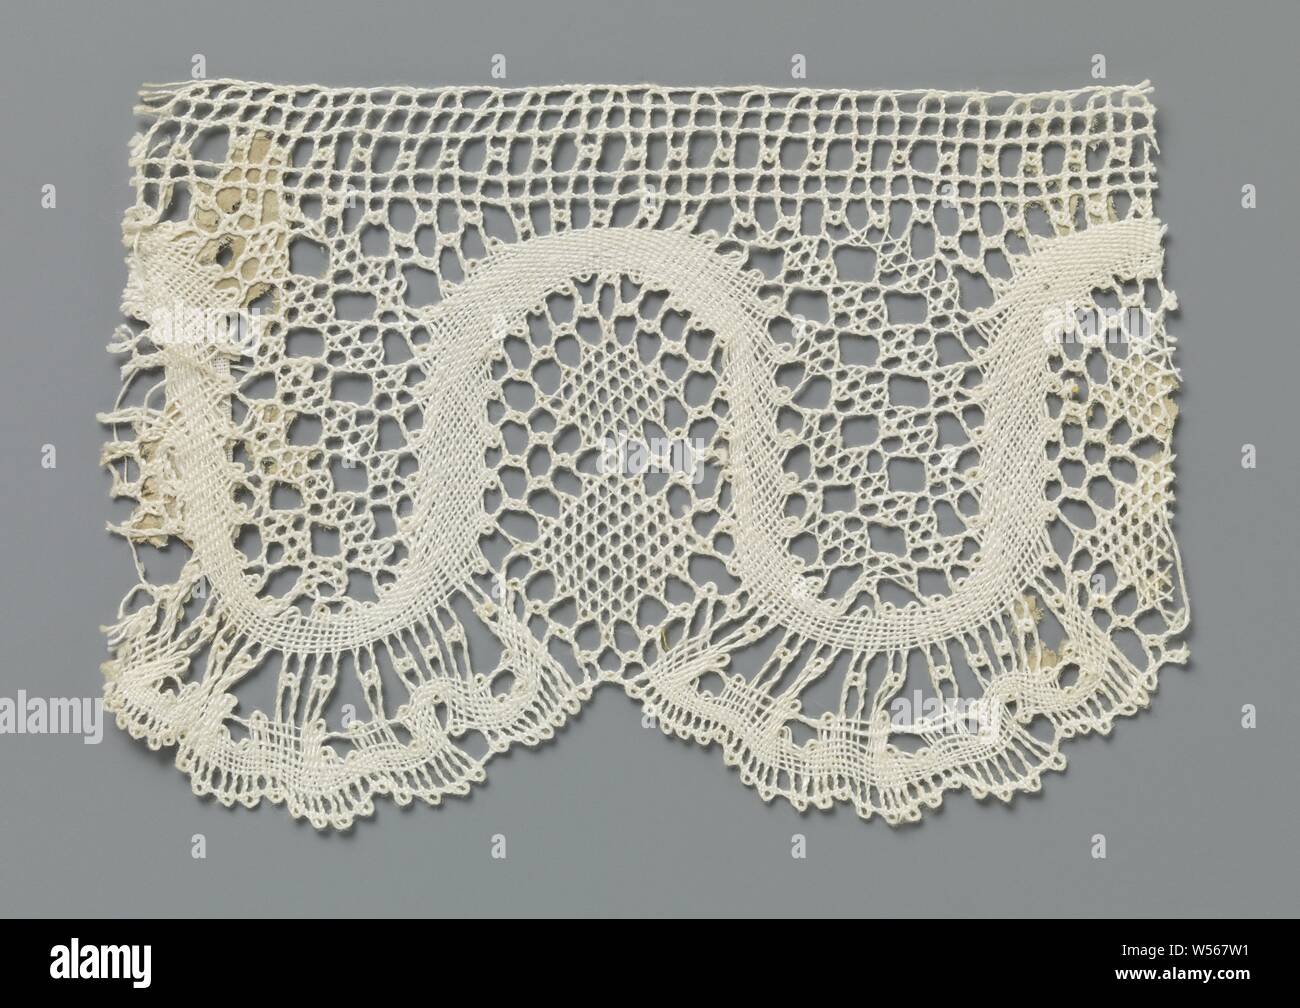 Strip of bobbin lace with a regular wavy line and fan scales, Strip of natural-colored bobbin lace: lace. The repeating pattern consists of a regularly wavy line in linen. The waves form u-shaped fields. Below the wave top there are two diamonds placed underneath each other in net stroke, the wave top touches the straight decorative band along the top of the strip. Fan-shaped shells hang under the wave valleys. In the golf valleys, an ornamental soil is used that forms square blocks. The top of the strip is finished straight., anonymous, Russia, c. 1900 - c. 1924, linen (material), torchon Stock Photo